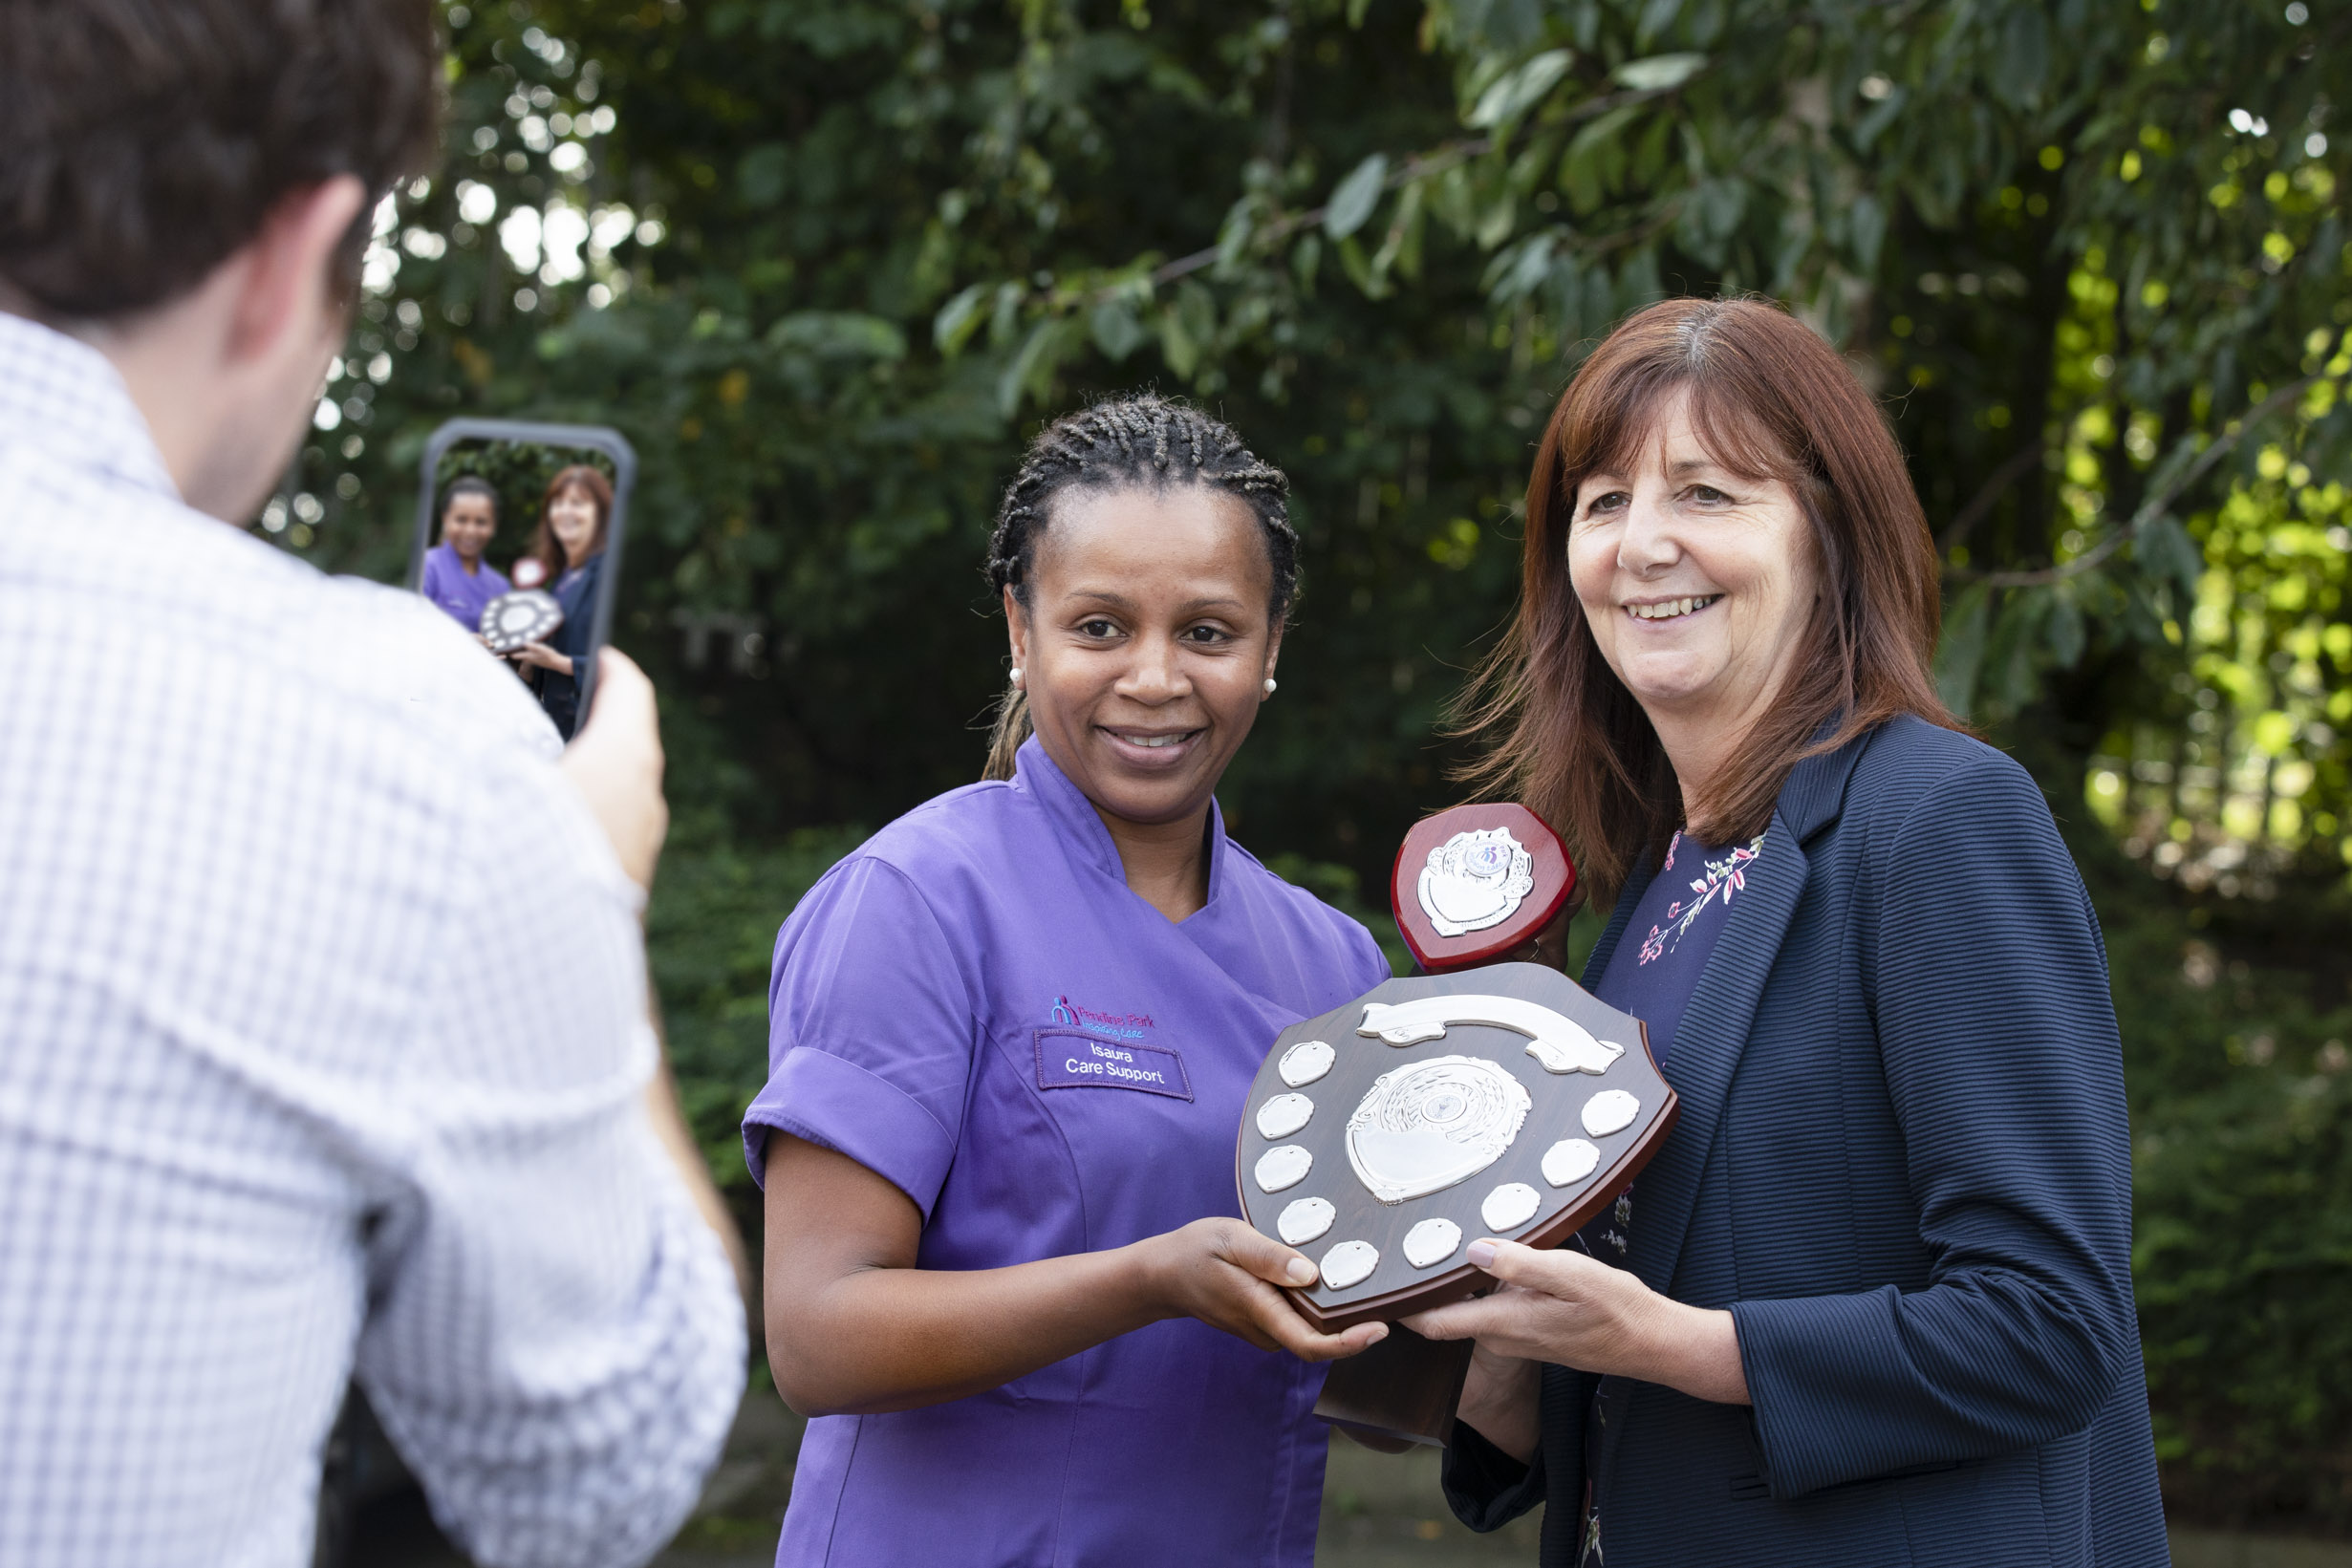 Dedicated Isuara cleans up with care home award